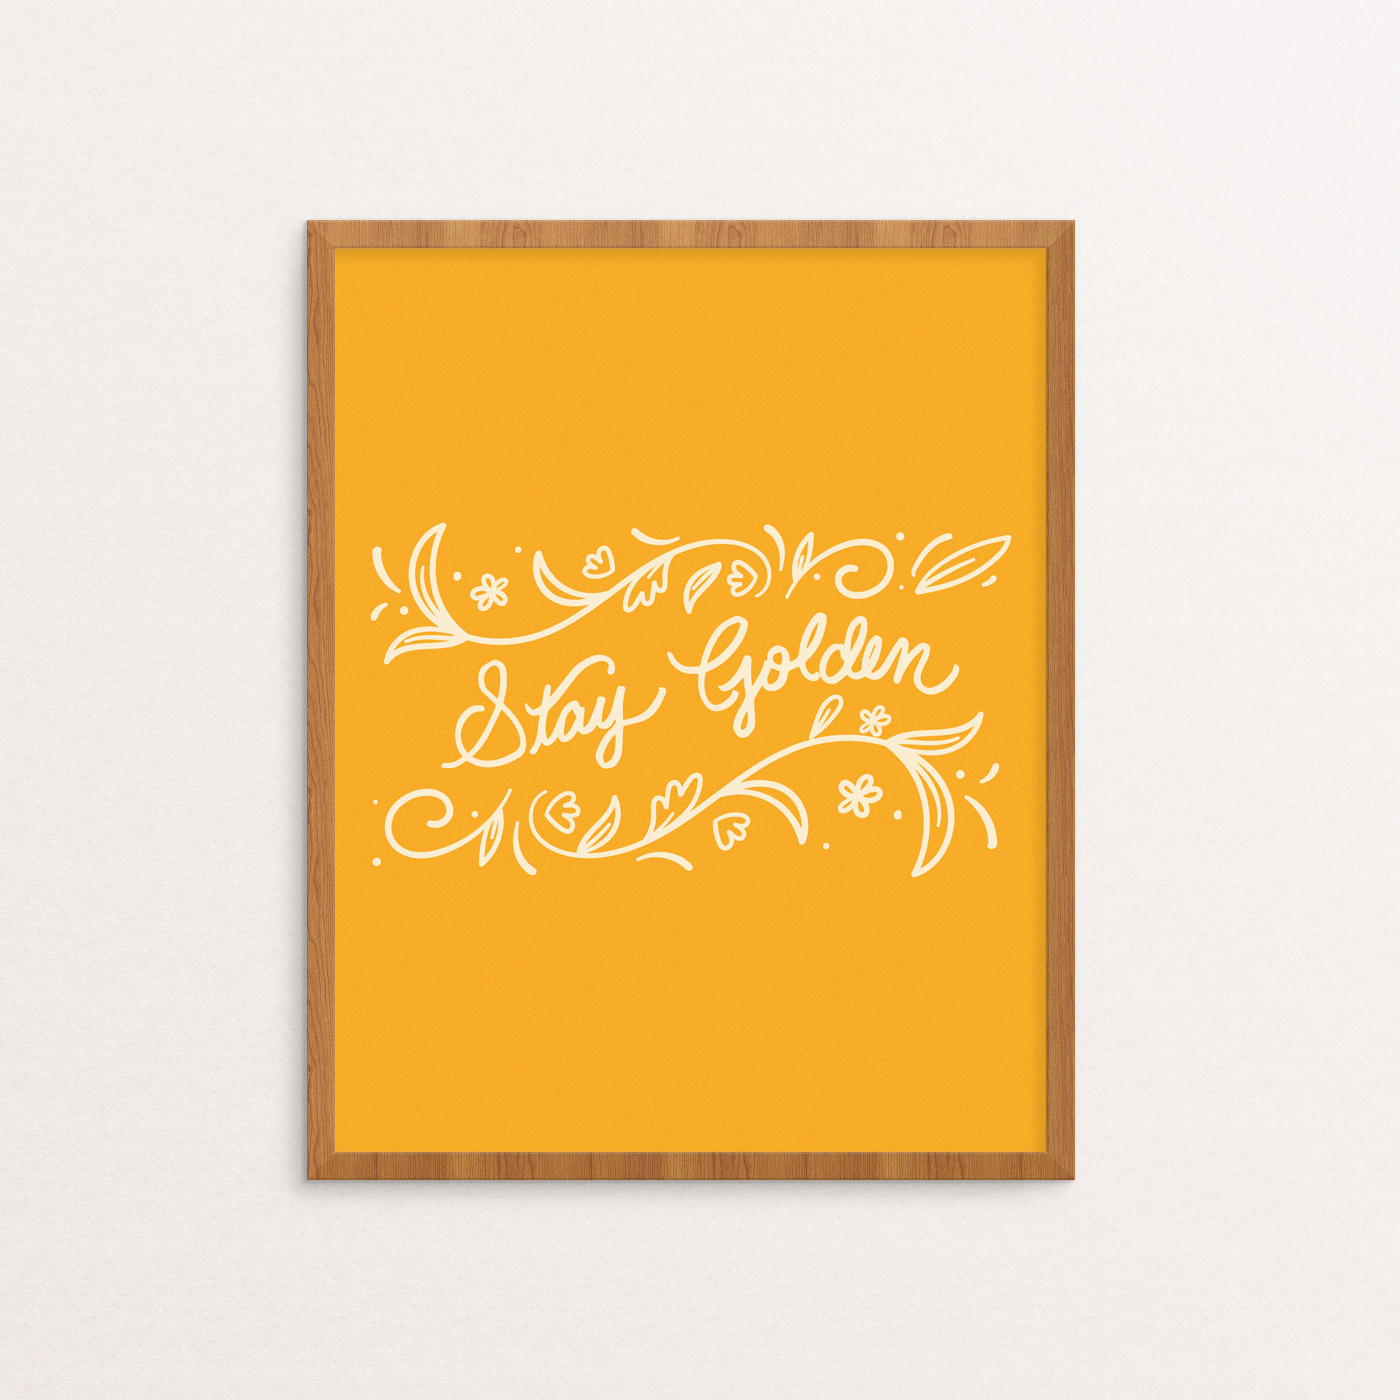 Stay Golden Handlettered in Creme on a Goldenrod Yellow Background